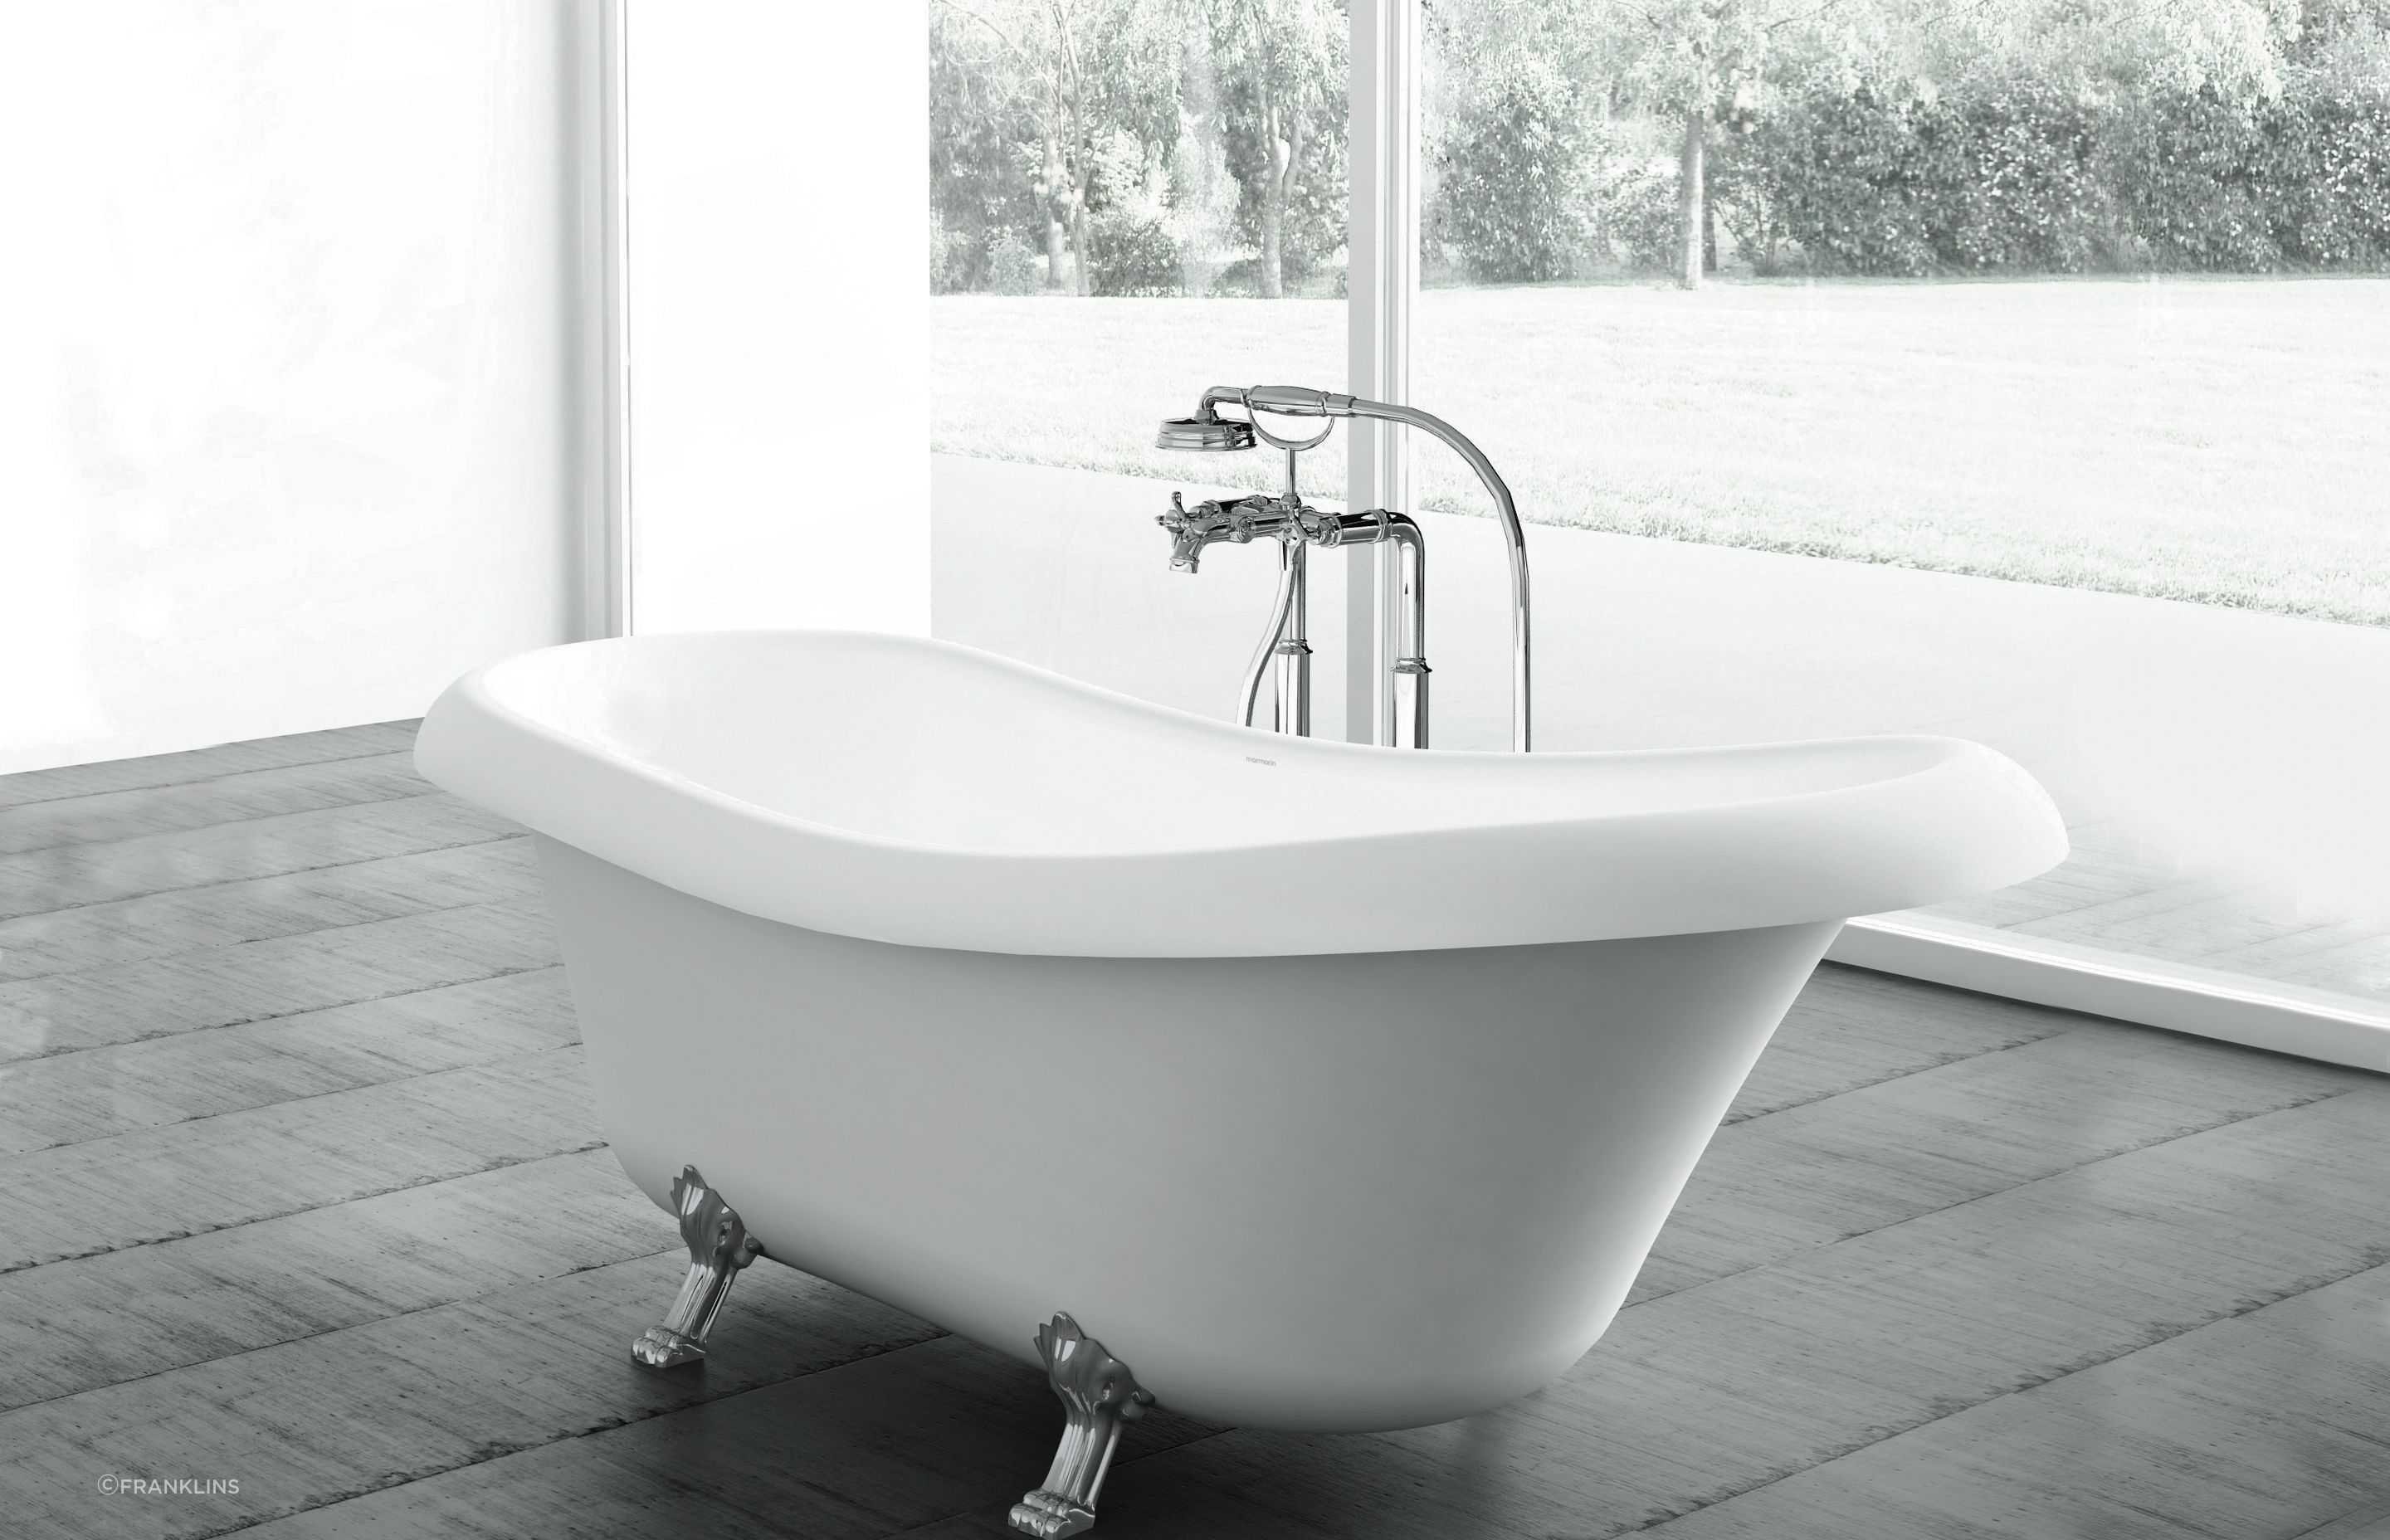 A timeless classic with the Marmorin Fama Freestanding Bath